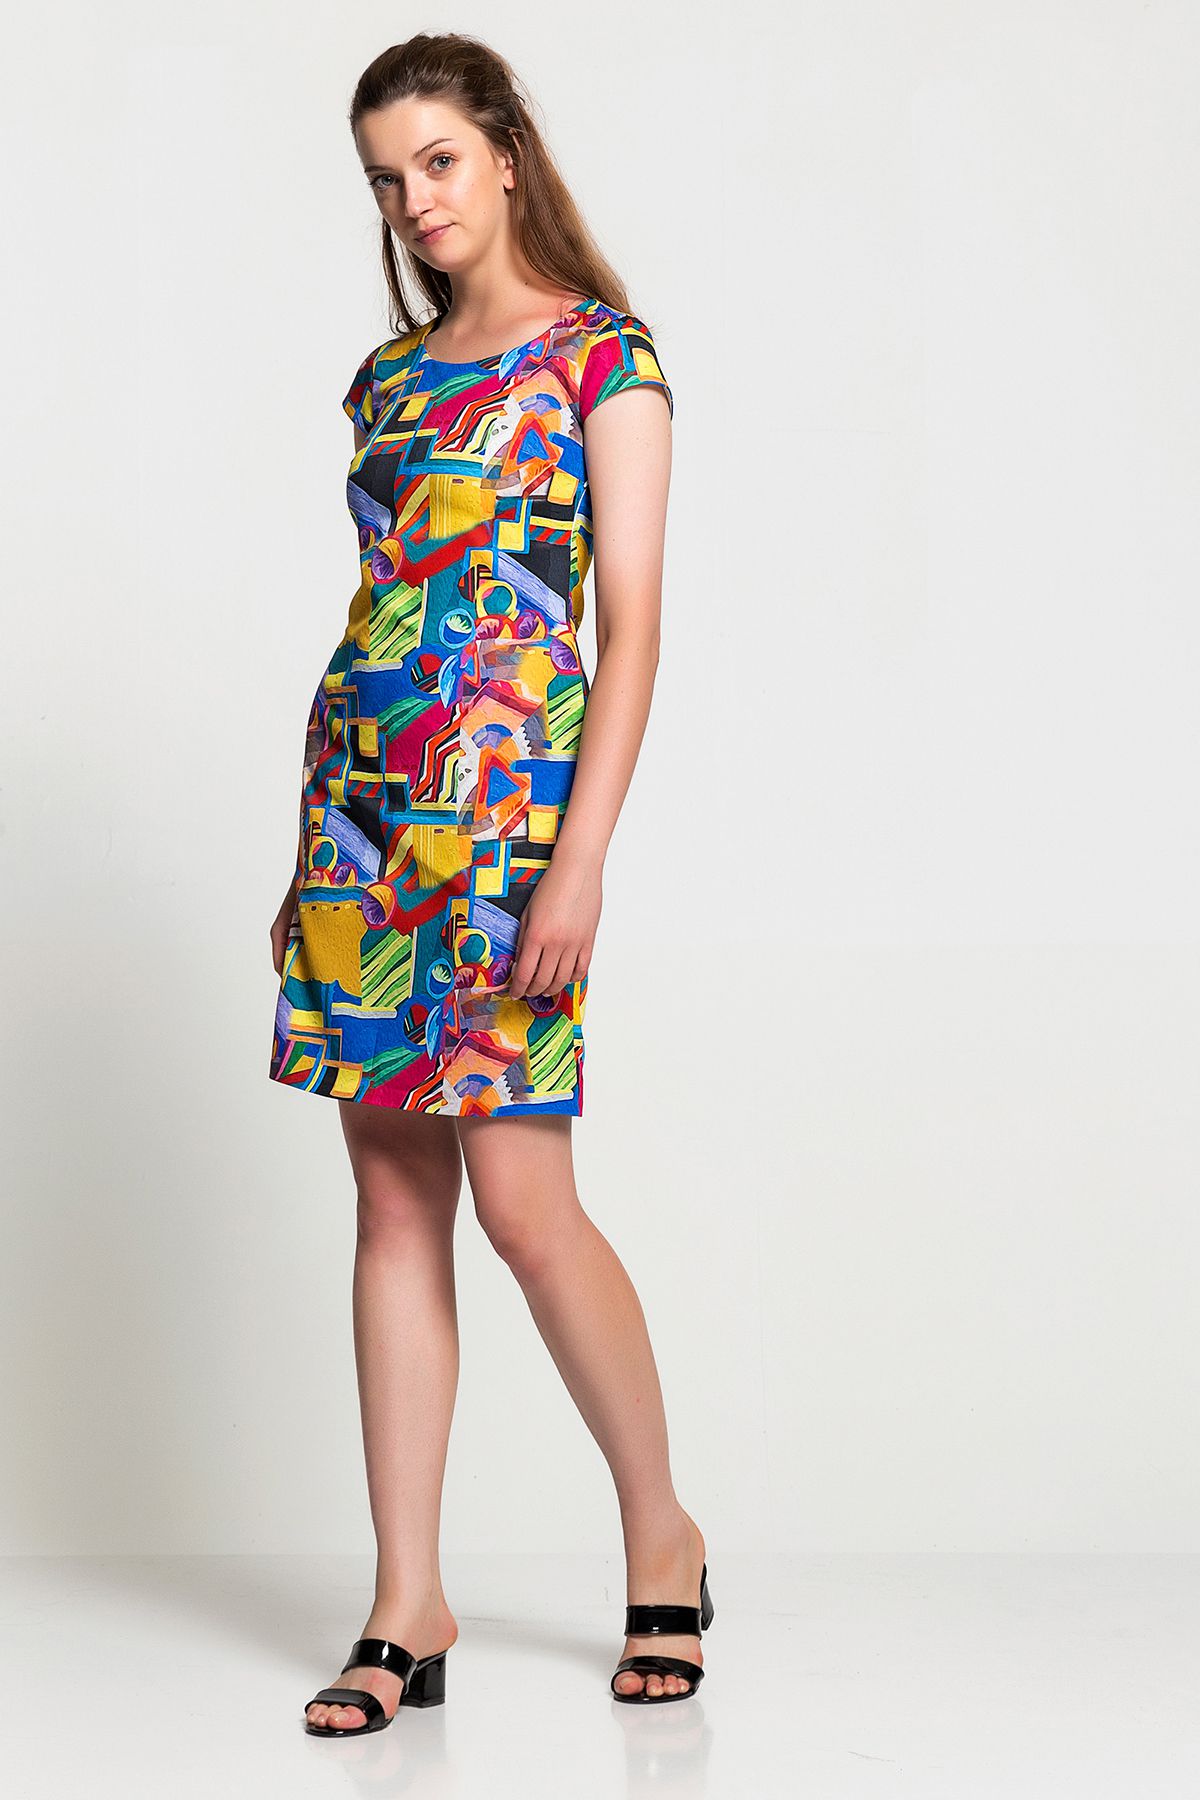 Woman Melange Colourful A Form Dress, Modern, High Quality and ...